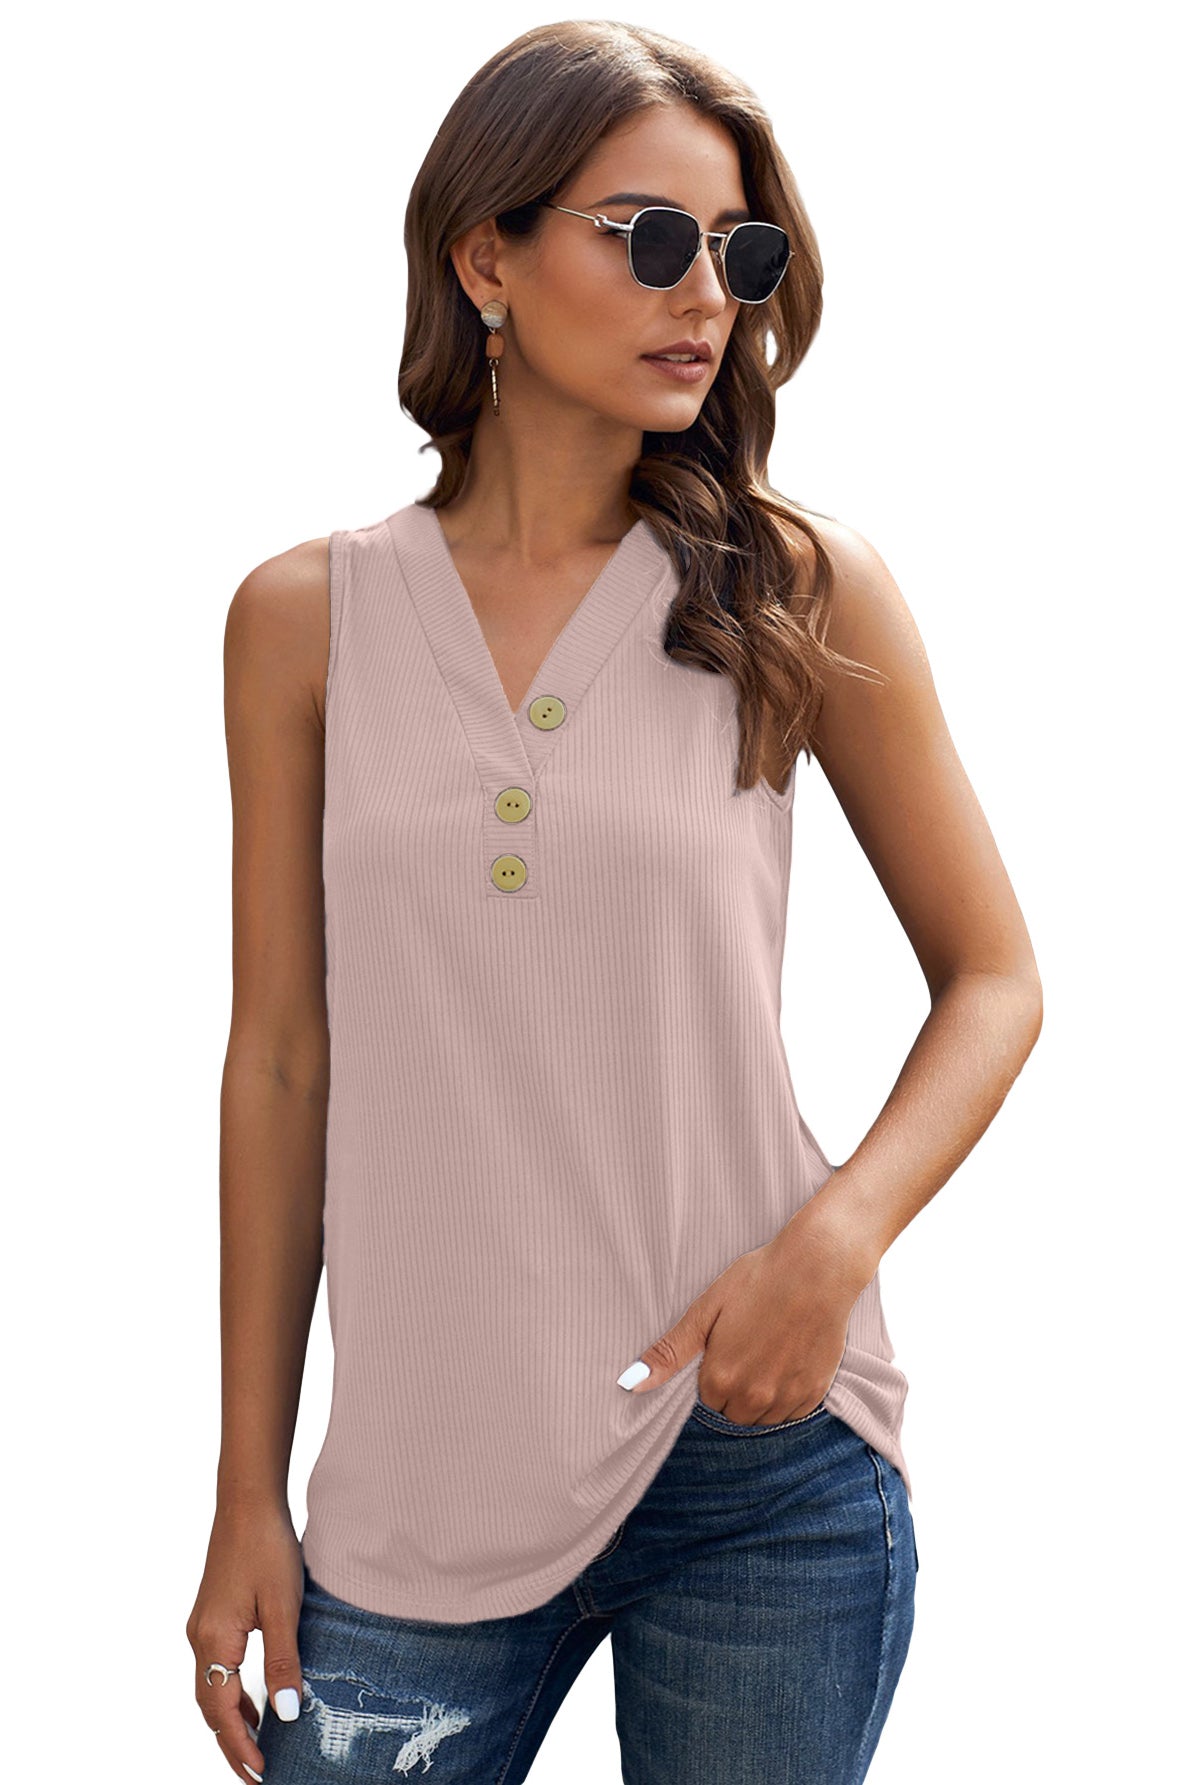 Pink Summer Casual V Neck Button Ladies Tank Top LC253080-10